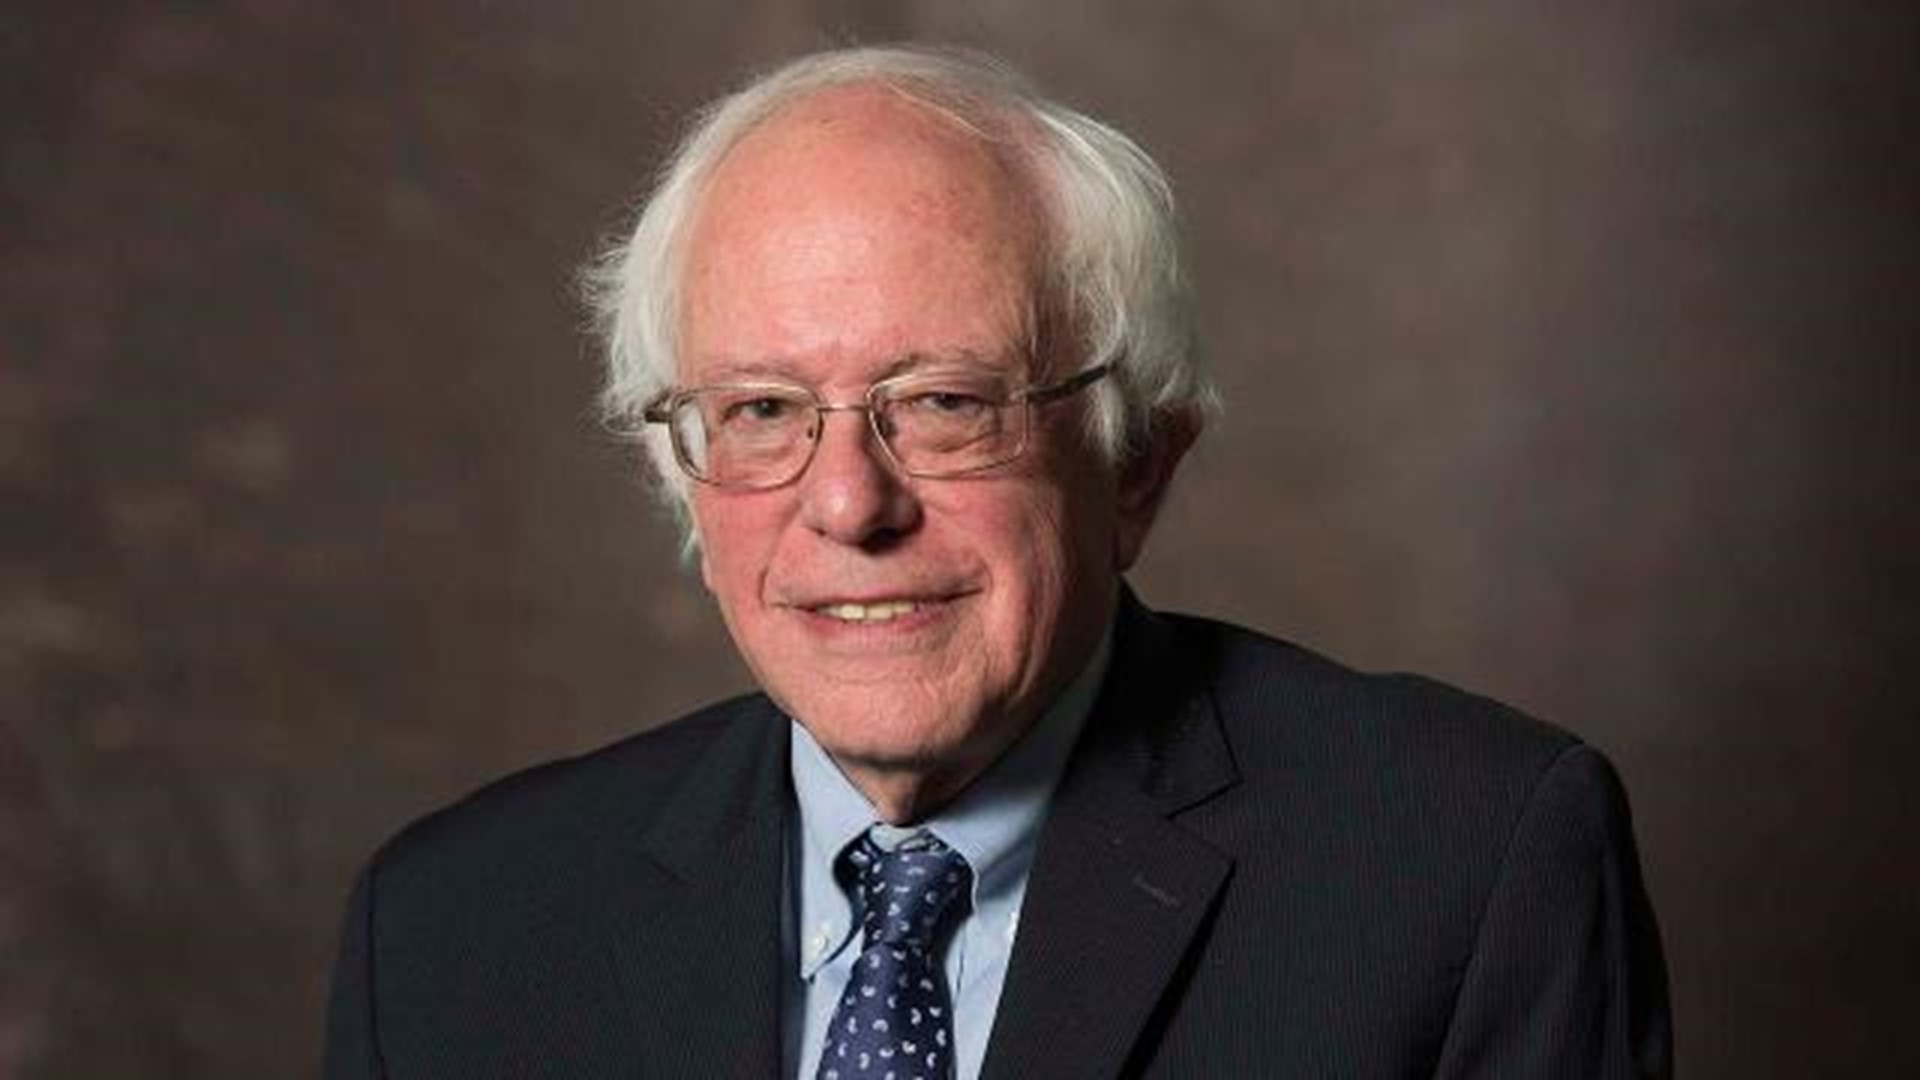 Sen. Bernie Sanders called for "rethinking" the Electoral College and warned President-elect Donald Trump that he should expect more street protests if he pursues divisive policies. USA TODAY